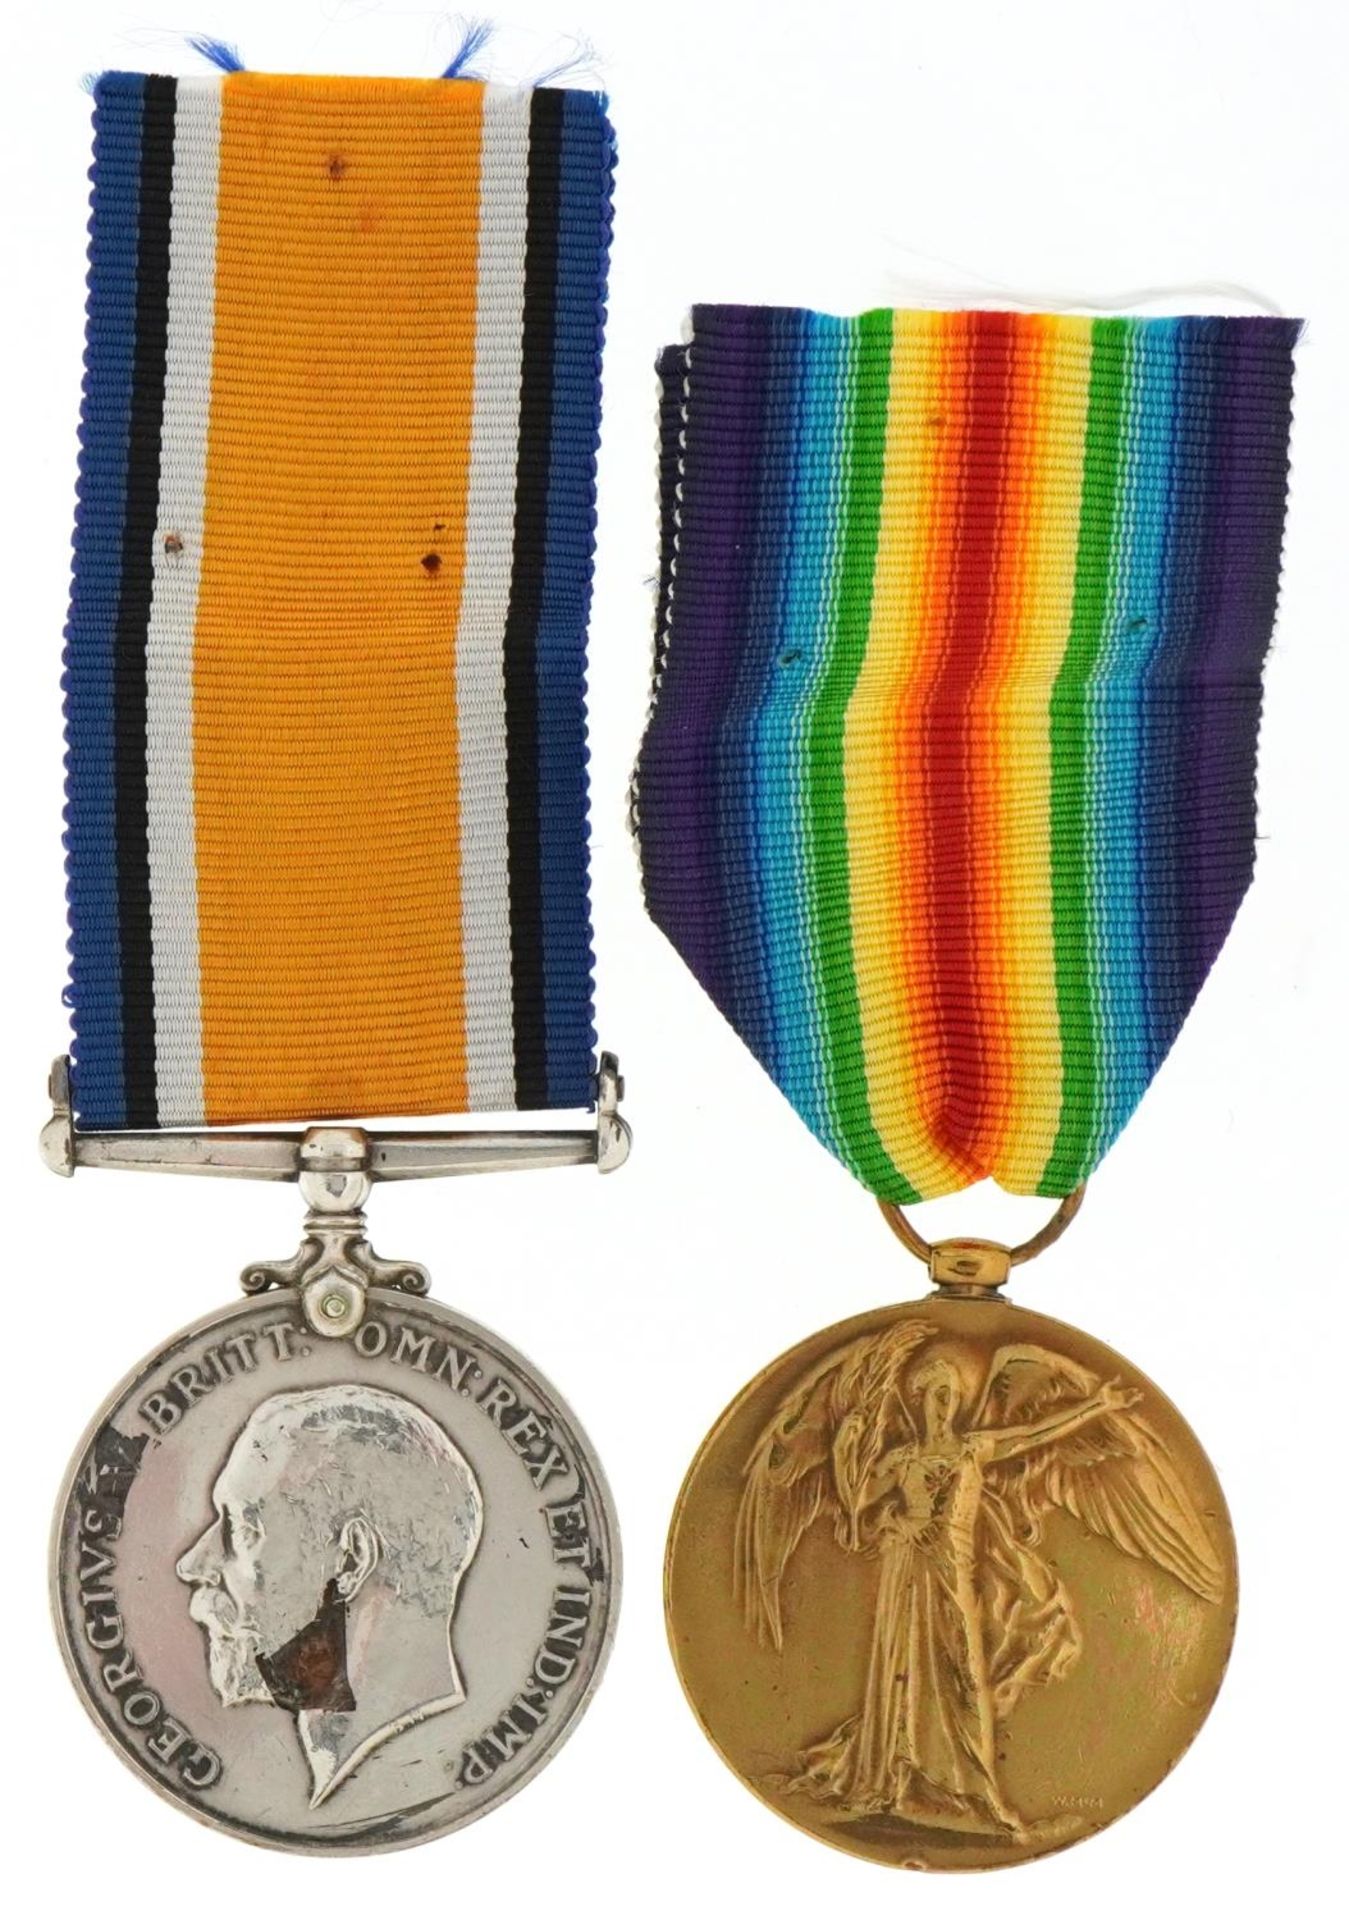 British military World War I medals awarded to PTE J.C.TIPPER K.O.Y.L.D. and SJT A.WILKS ACC - Image 2 of 9